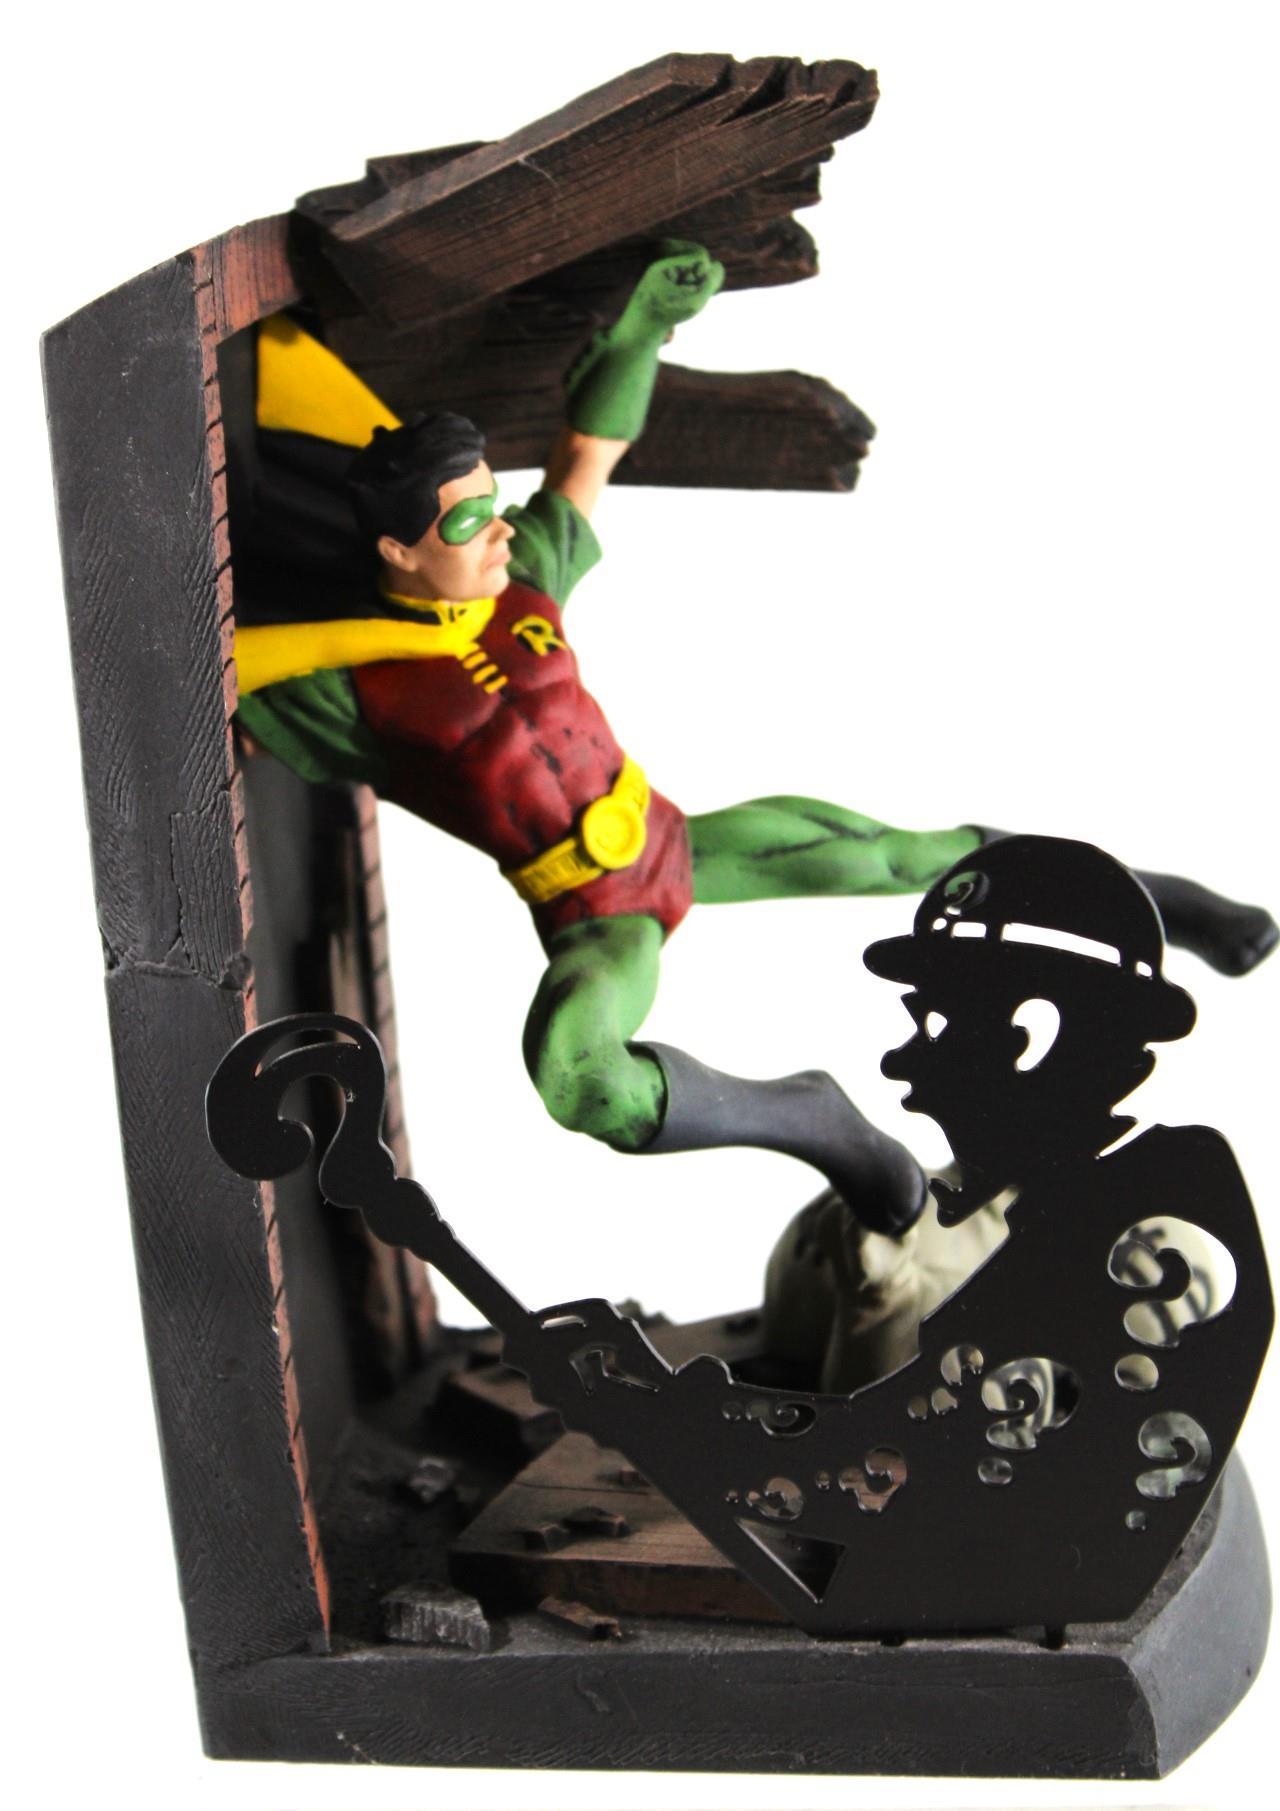 BATMAN AND ROBIN BOOKENDS